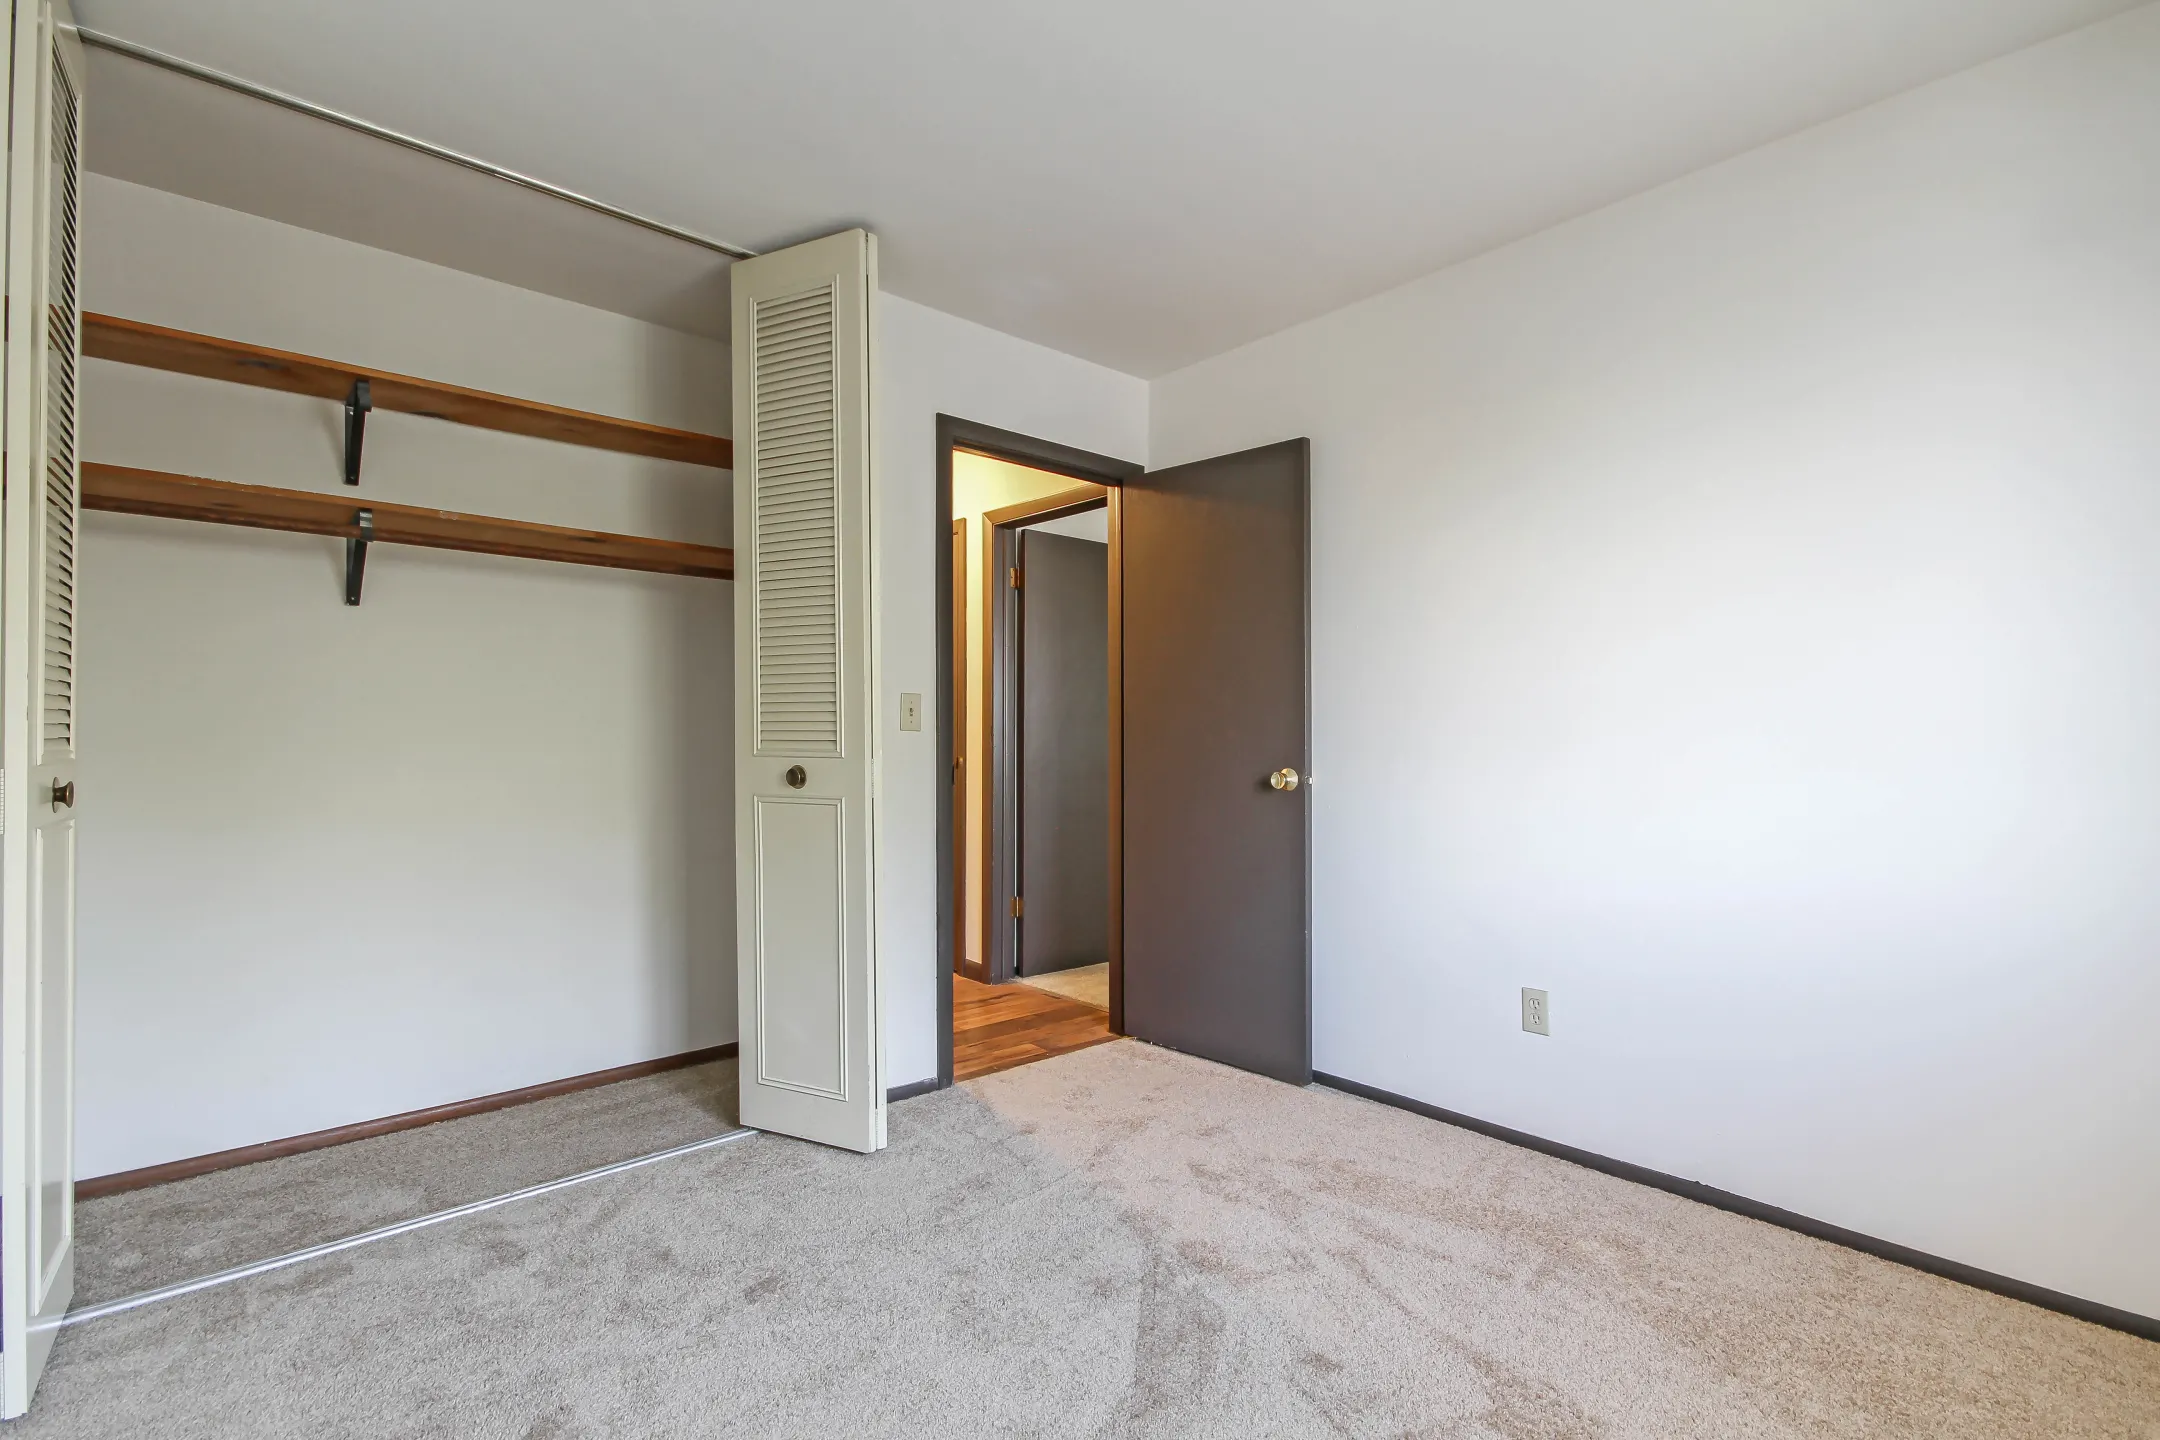 Bedroom - Woodsview Apartments - Milwaukee, WI